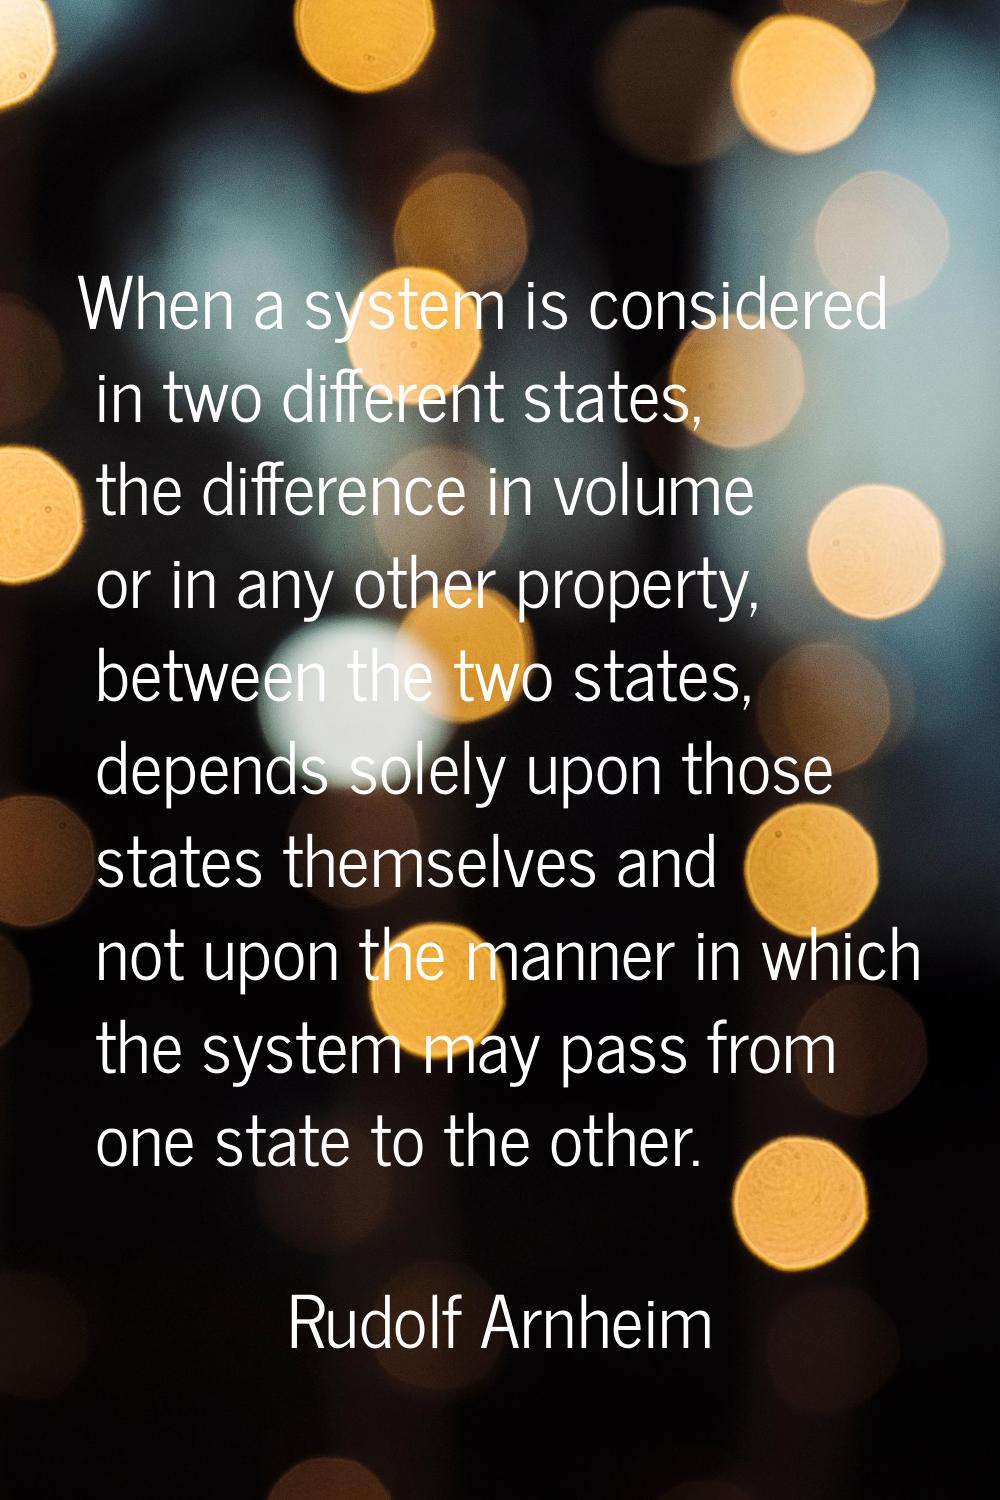 When a system is considered in two different states, the difference in volume or in any other prope